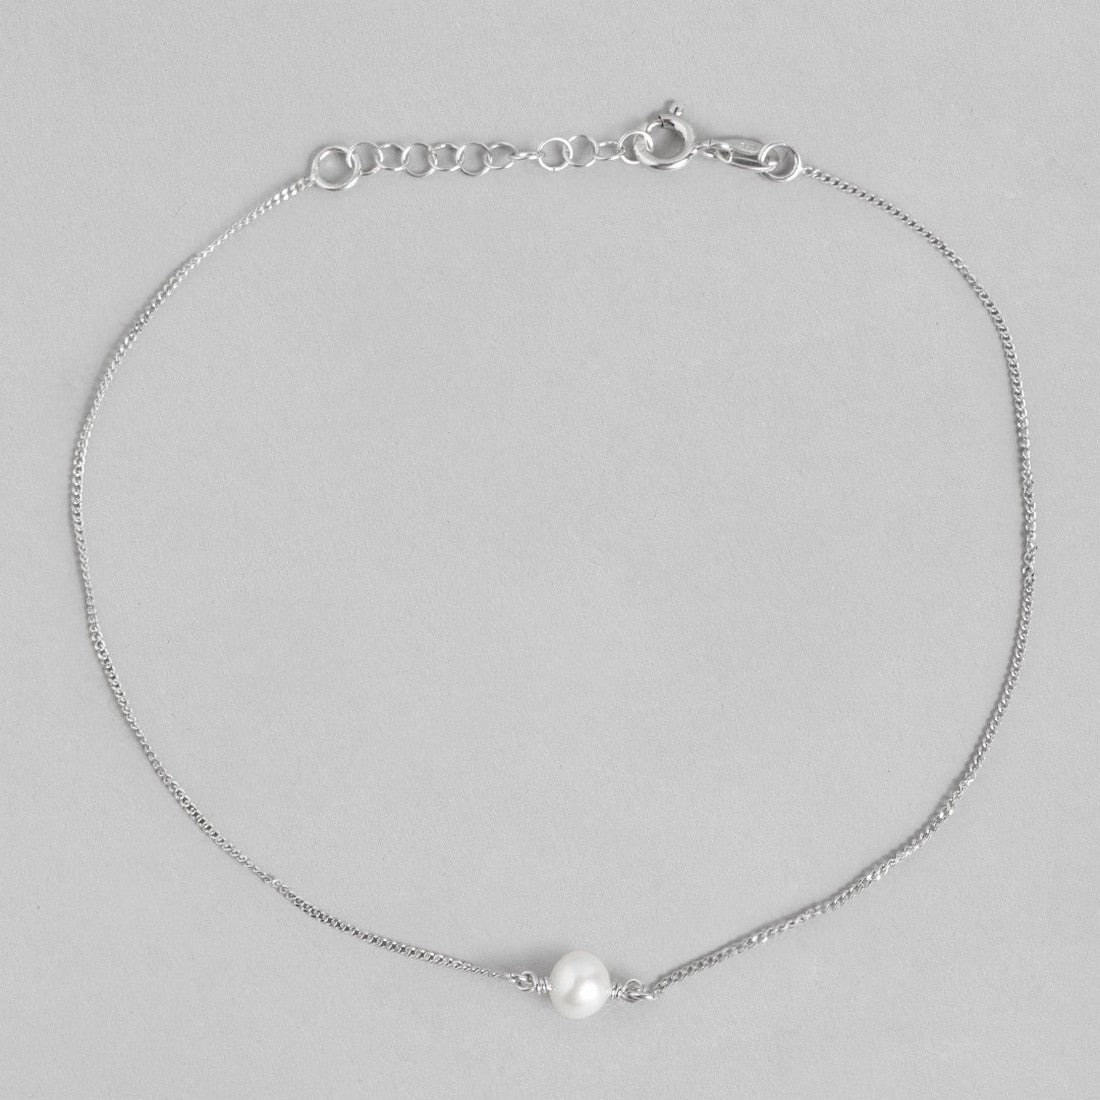 White Pearl Rhodium Plated 925 Sterling Silver Chain Anklet